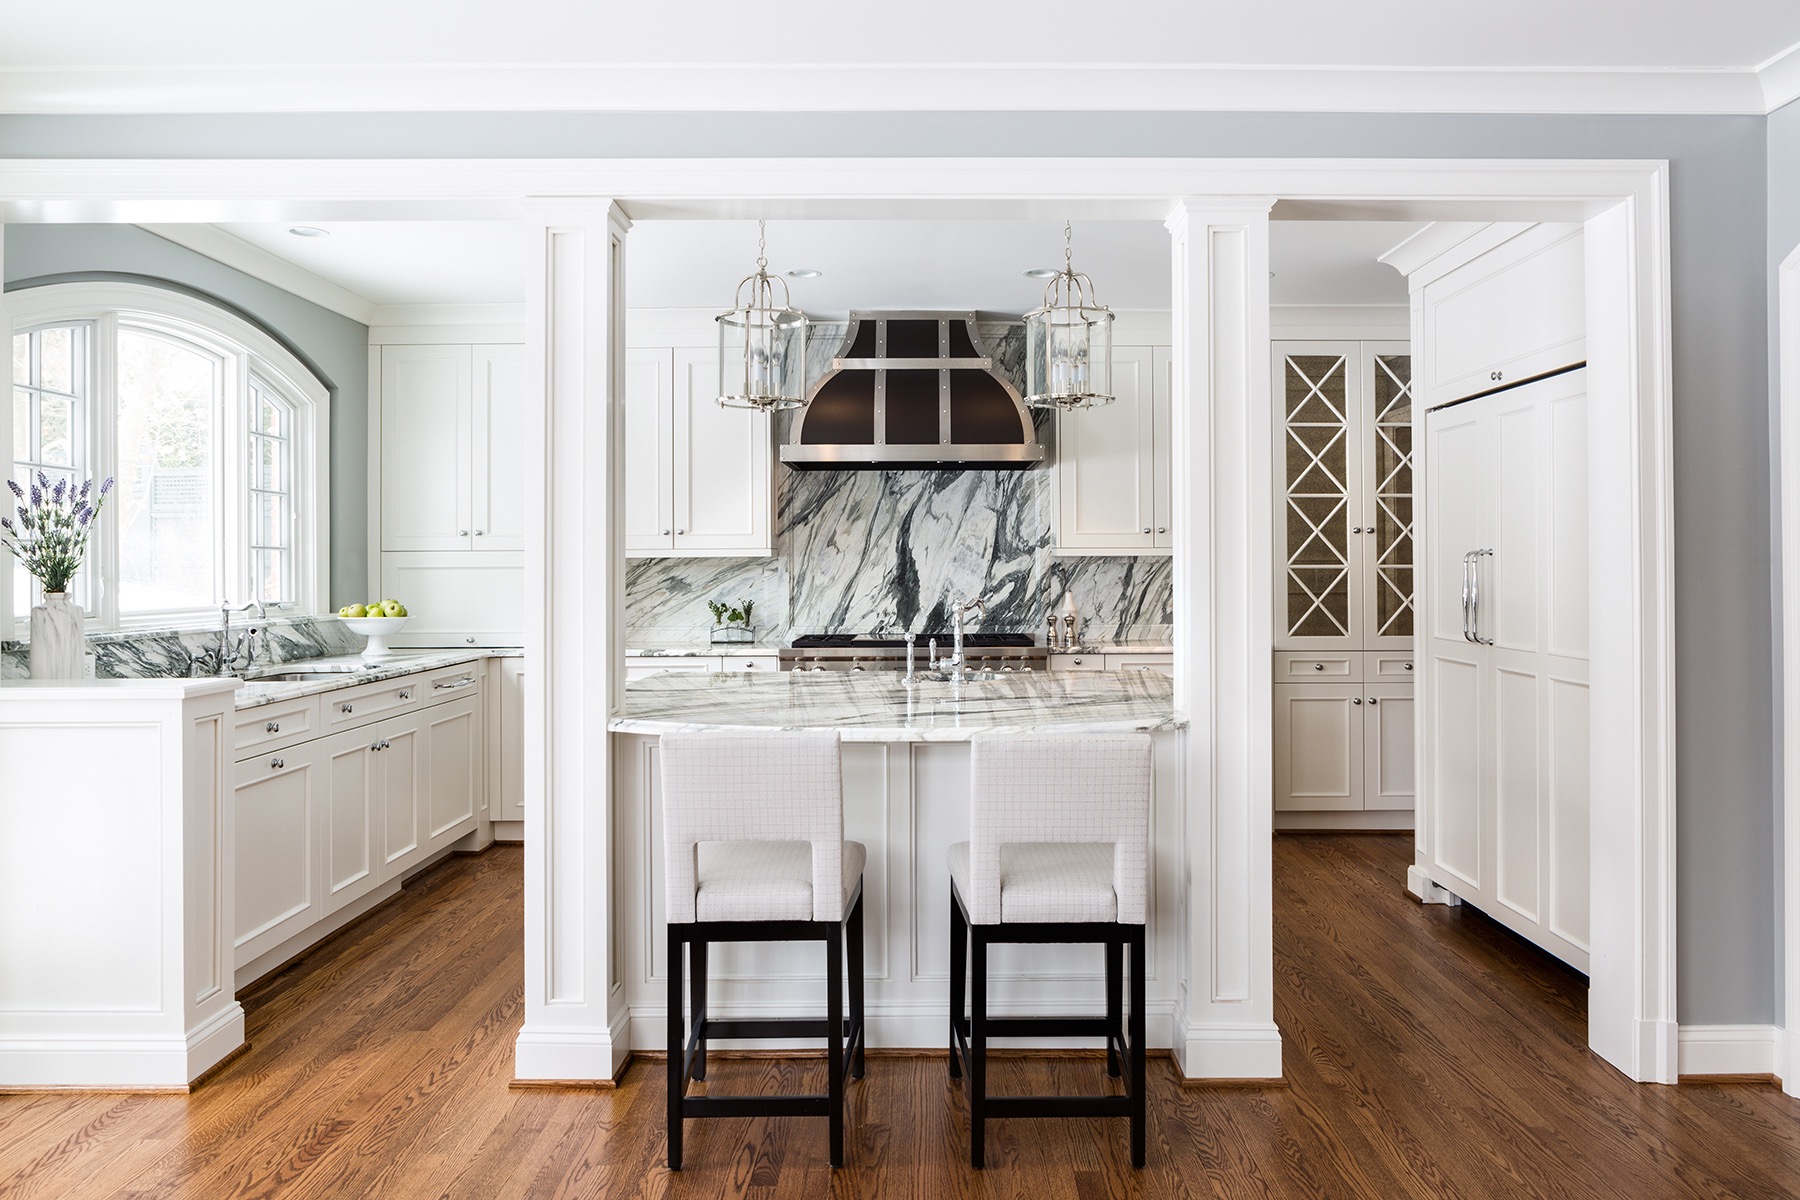 Kitchen island with white barstools, high-contrast white marble counters and backsplash, custom-built columns